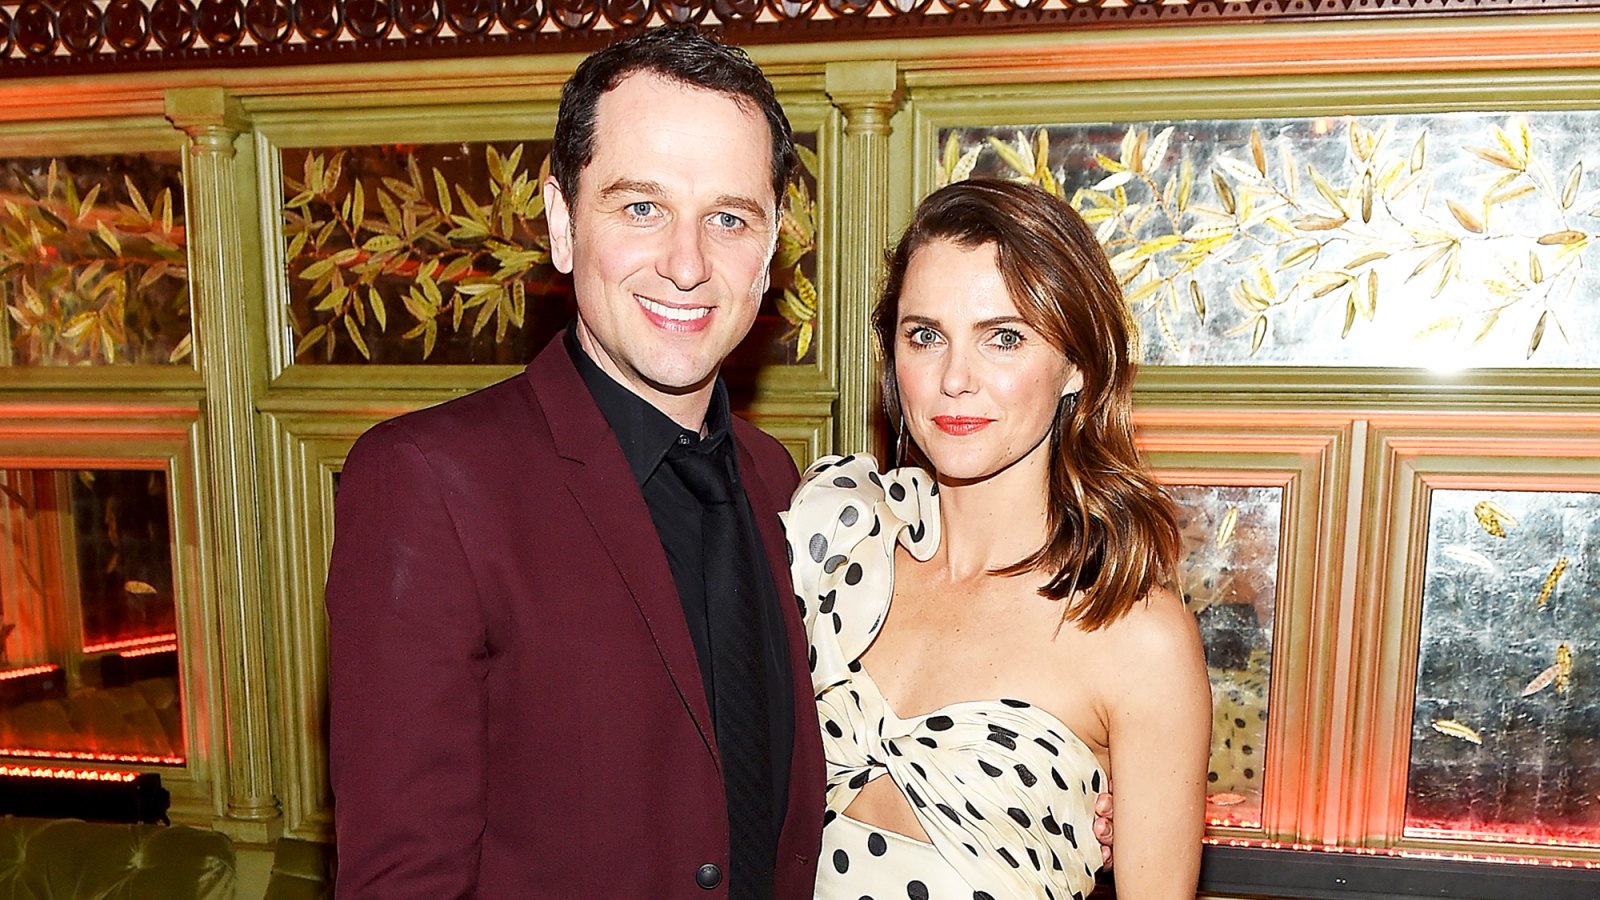 Matthew Rhys and Keri Russell attend 'The Americans' Season 6 Premiere After Party at Tavern On The Green on March 16, 2018 in New York City.